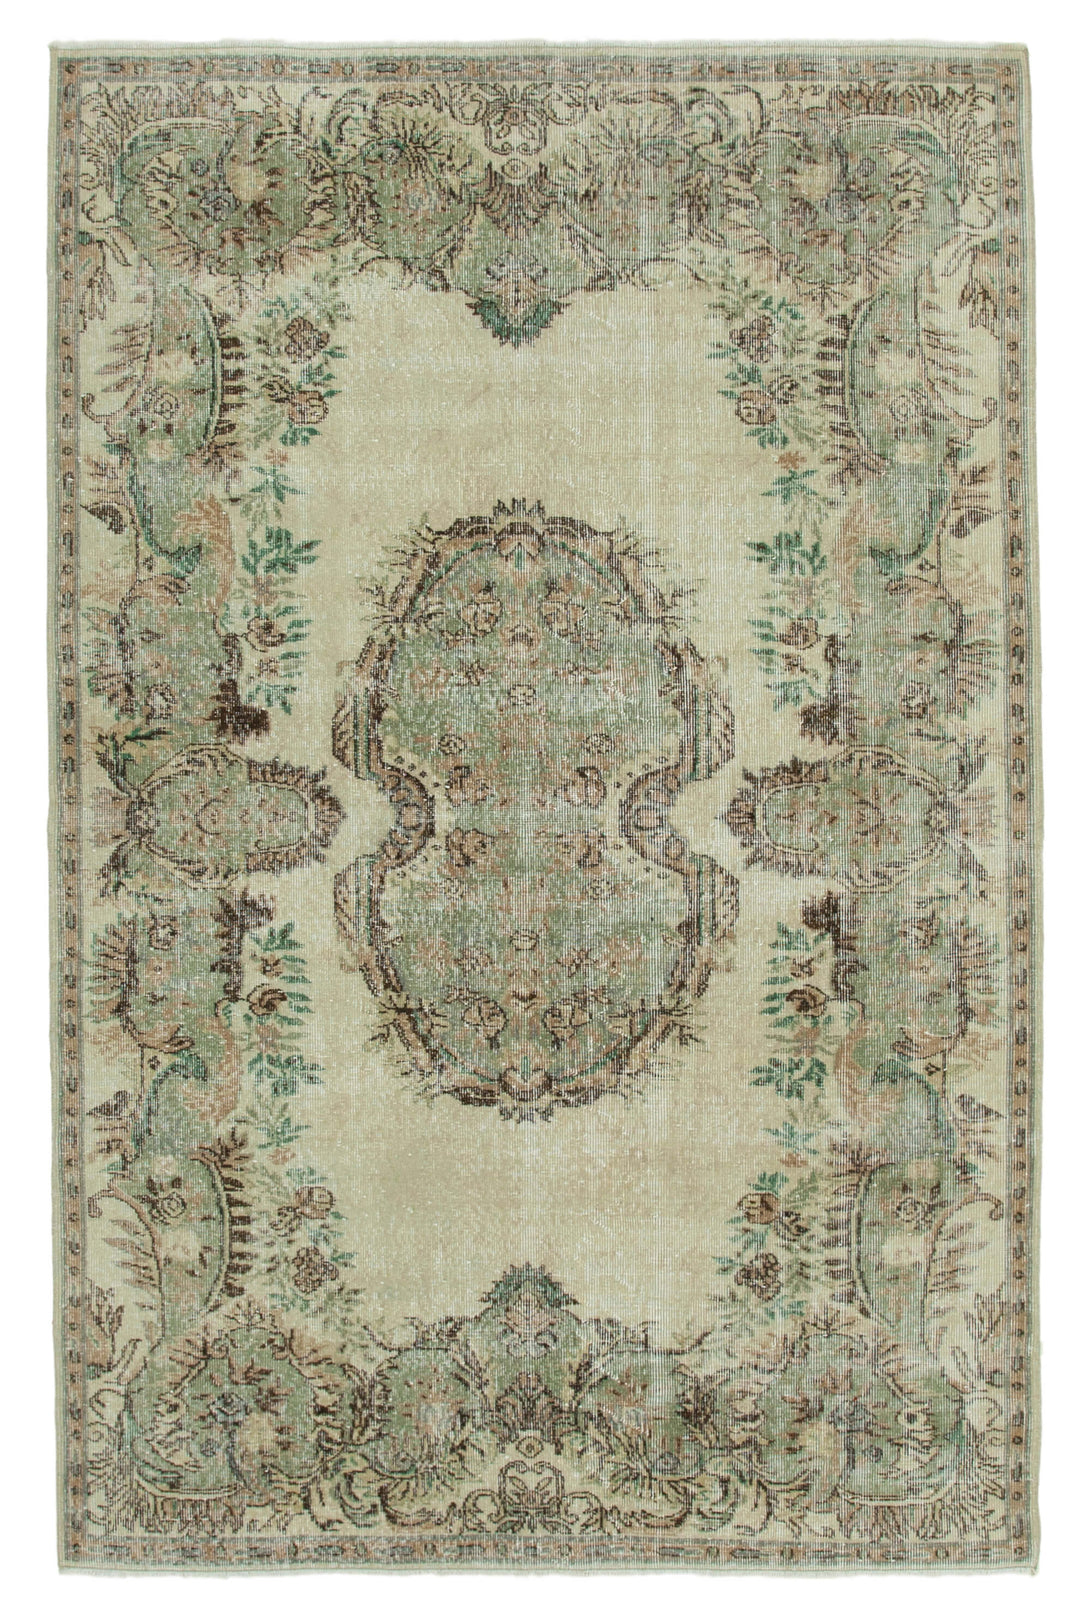 Handmade White Wash Area Rug > Design# OL-AC-36462 > Size: 6'-0" x 9'-2", Carpet Culture Rugs, Handmade Rugs, NYC Rugs, New Rugs, Shop Rugs, Rug Store, Outlet Rugs, SoHo Rugs, Rugs in USA